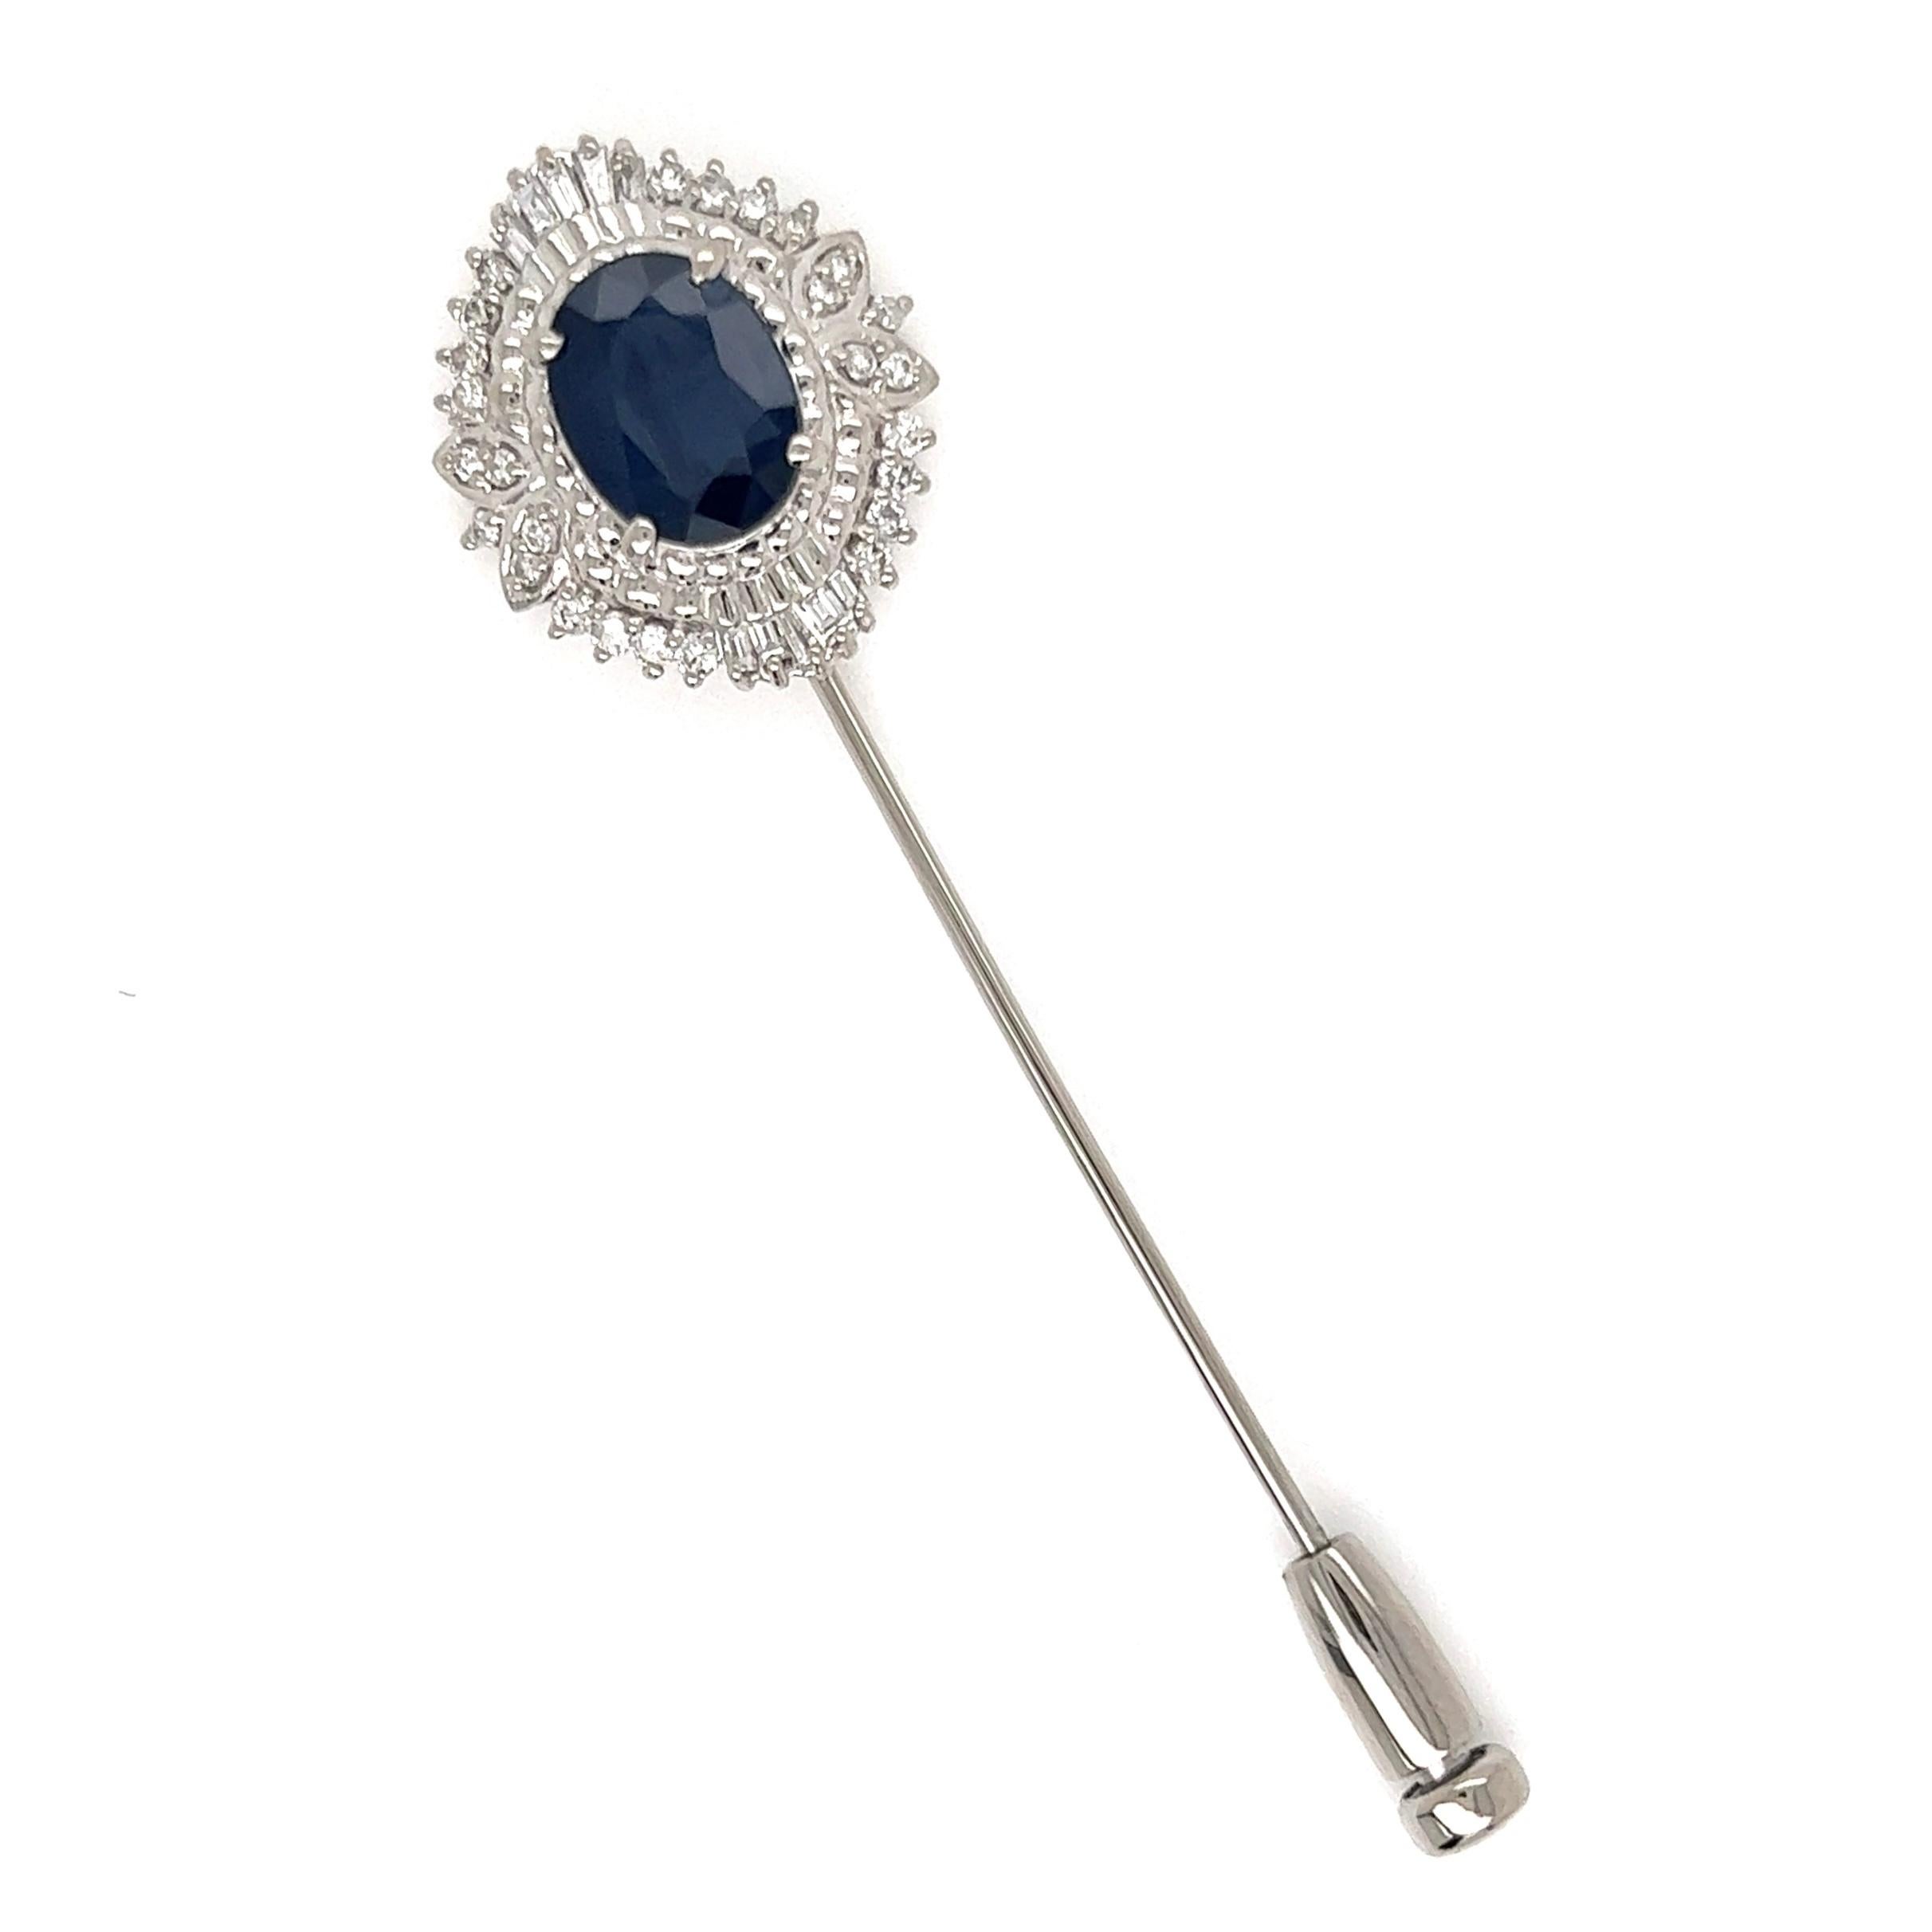 Simply Beautiful! Finely detailed Platinum Stick Pin. Center securely nestled with a Hand set Oval Blue Sapphire weighing approx. 1.87 Carat. Surrounded by Hand set Diamonds, approx. 0.39tcw. Artistically Hand crafted in Platinum. Dimensions: 2.25”